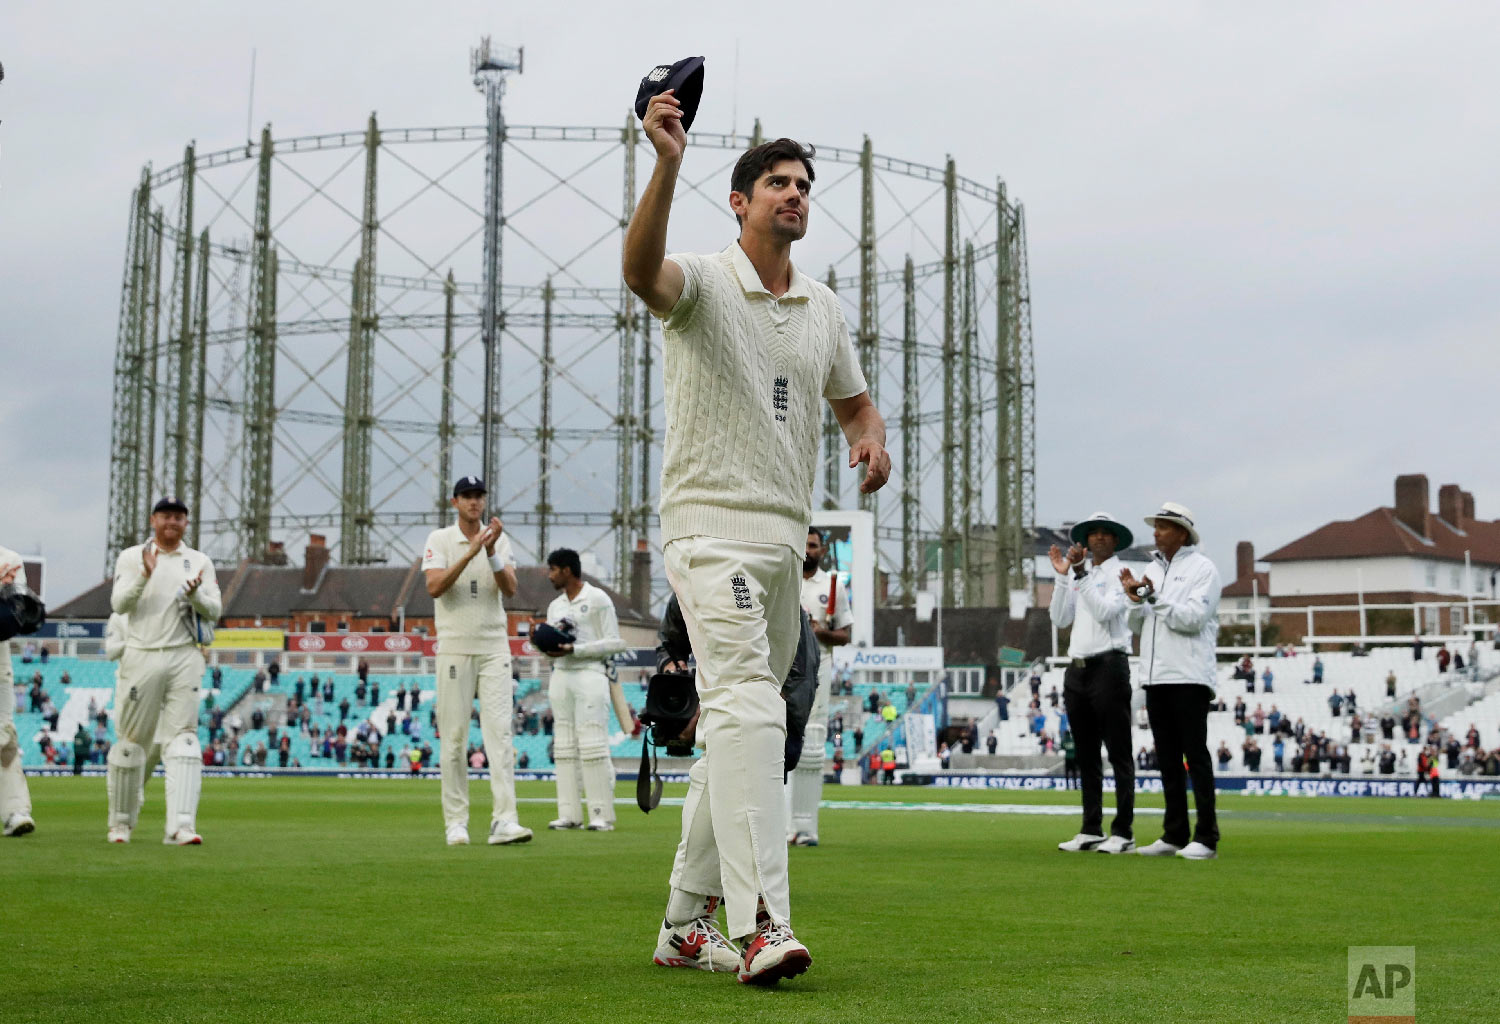  England's Alastair Cook, at the end of his final match before retiring from test cricket, raises his cap as he walks off at the end of the fifth cricket test match of a five match series between England and India at the Oval cricket ground in London